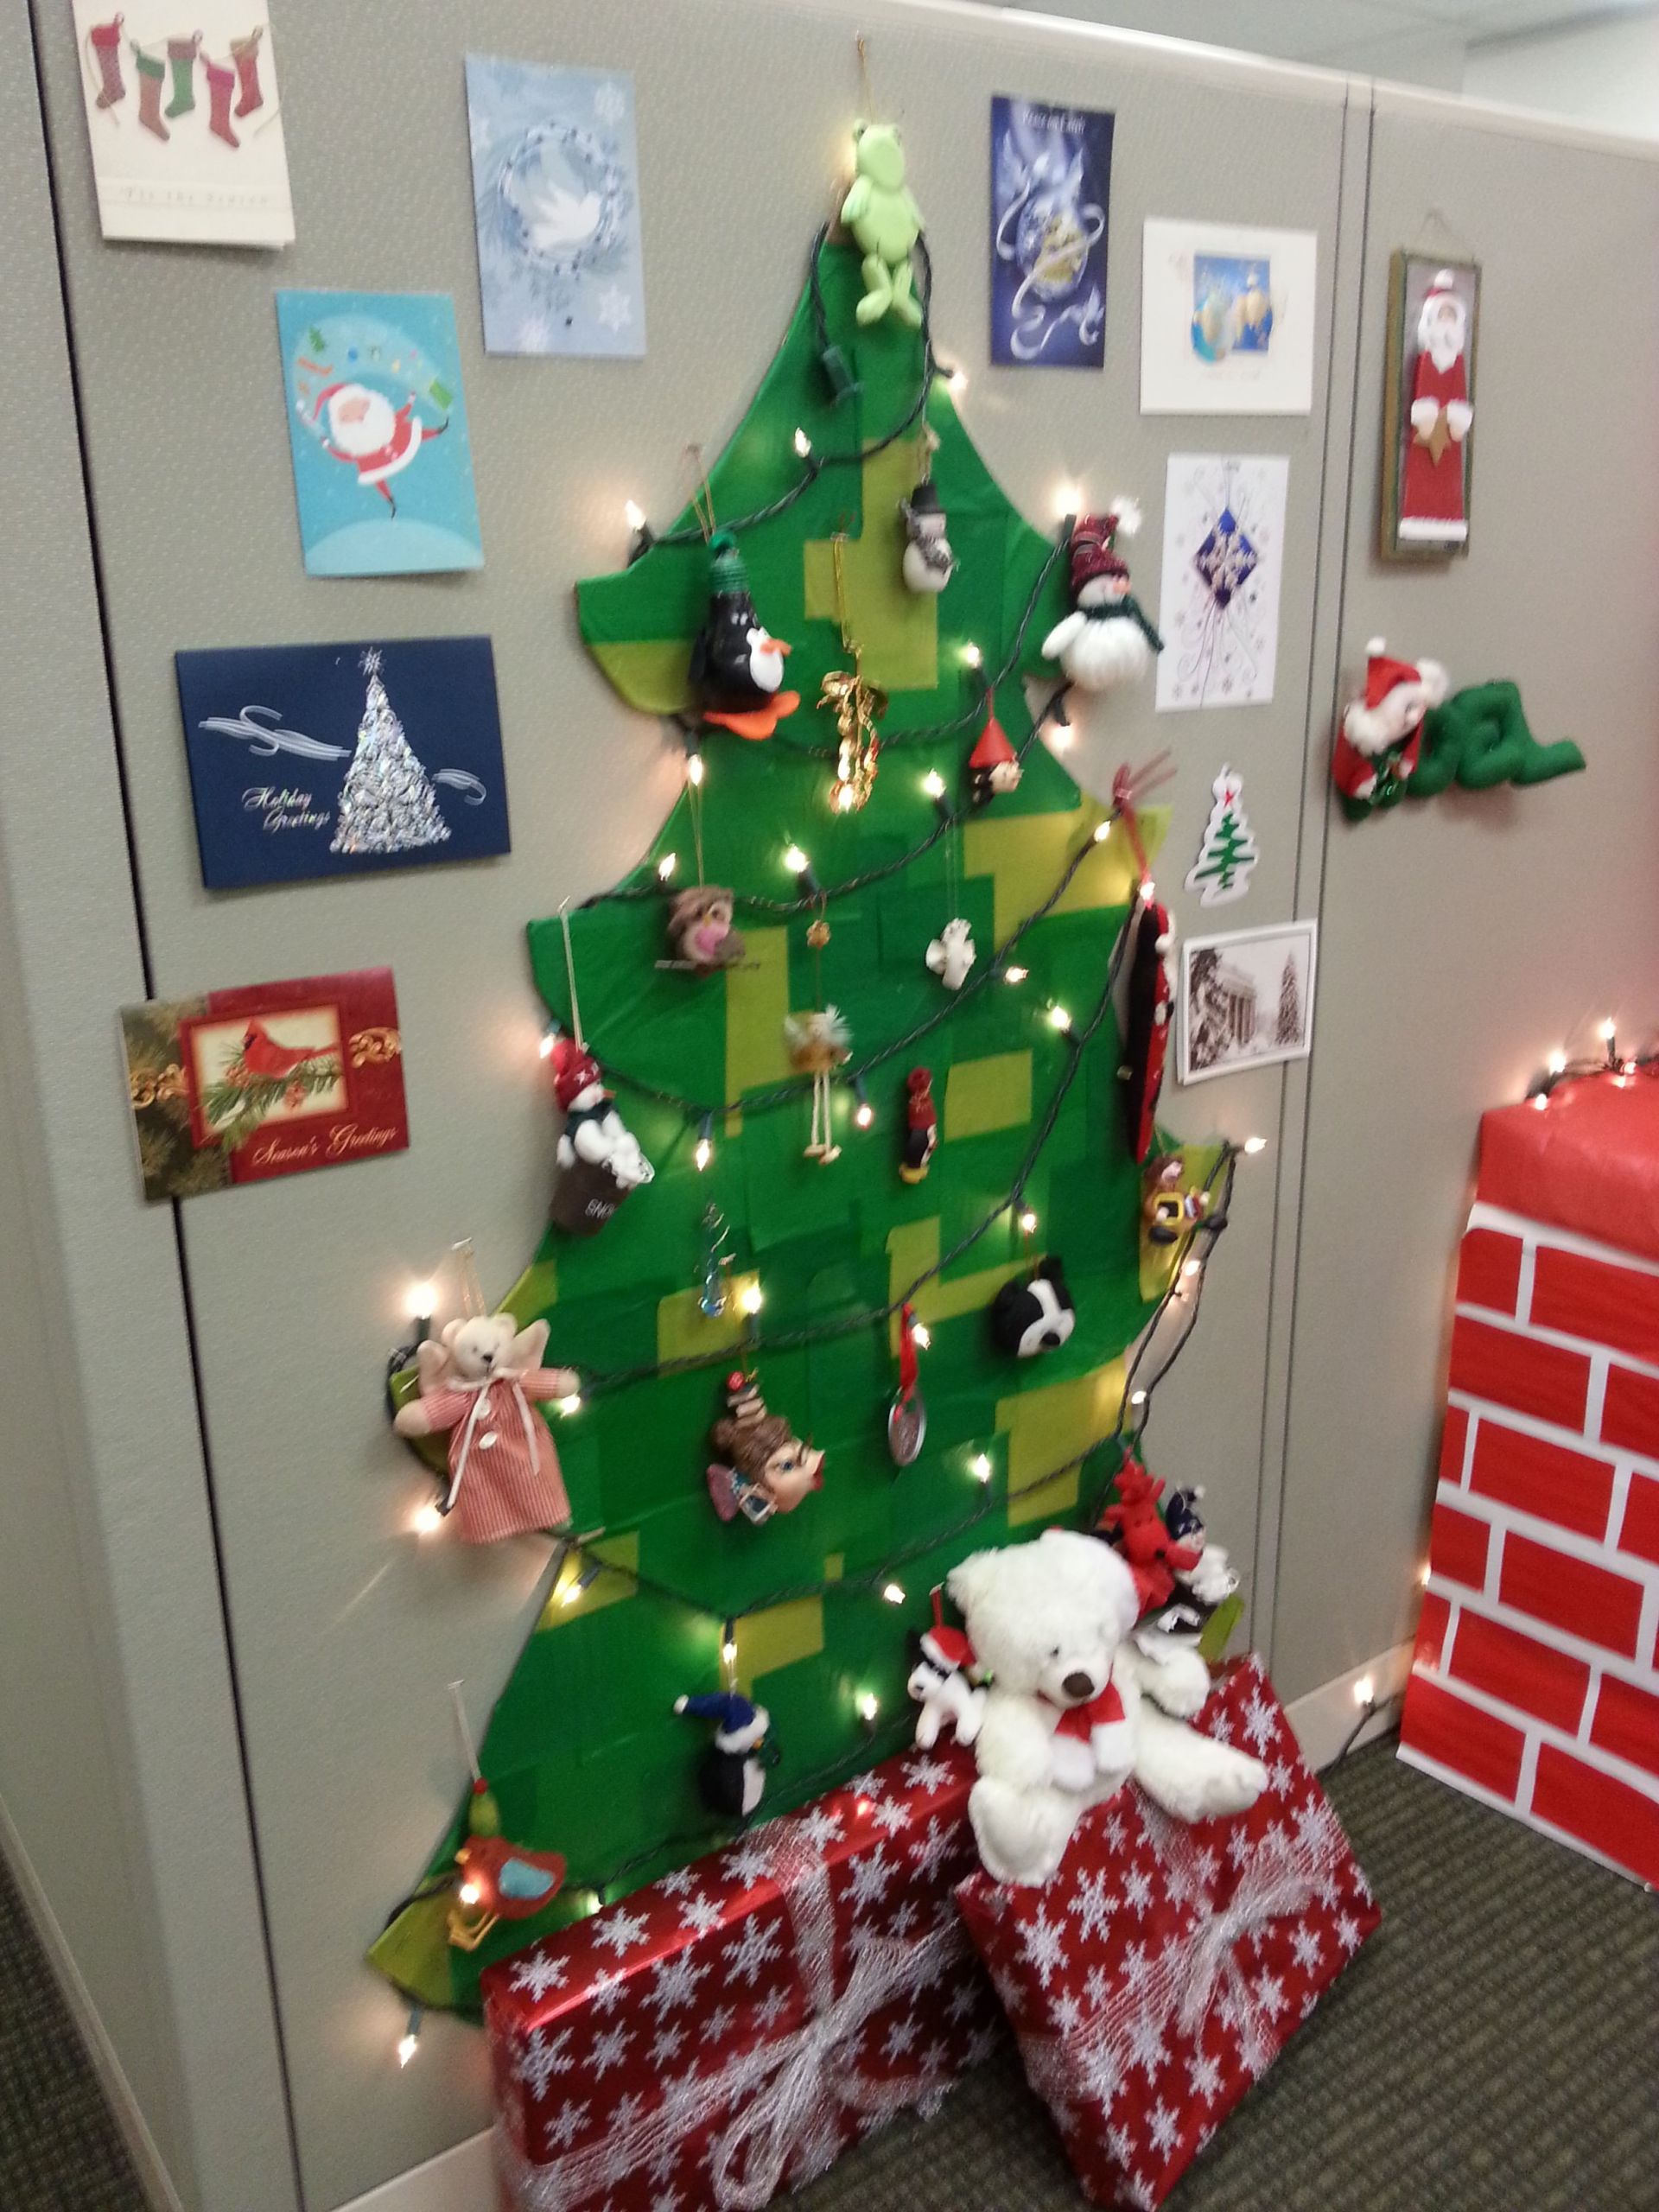 Cubicle Christmas Decorations Ideas
 Cubicle Christmas tree created from a large piece of